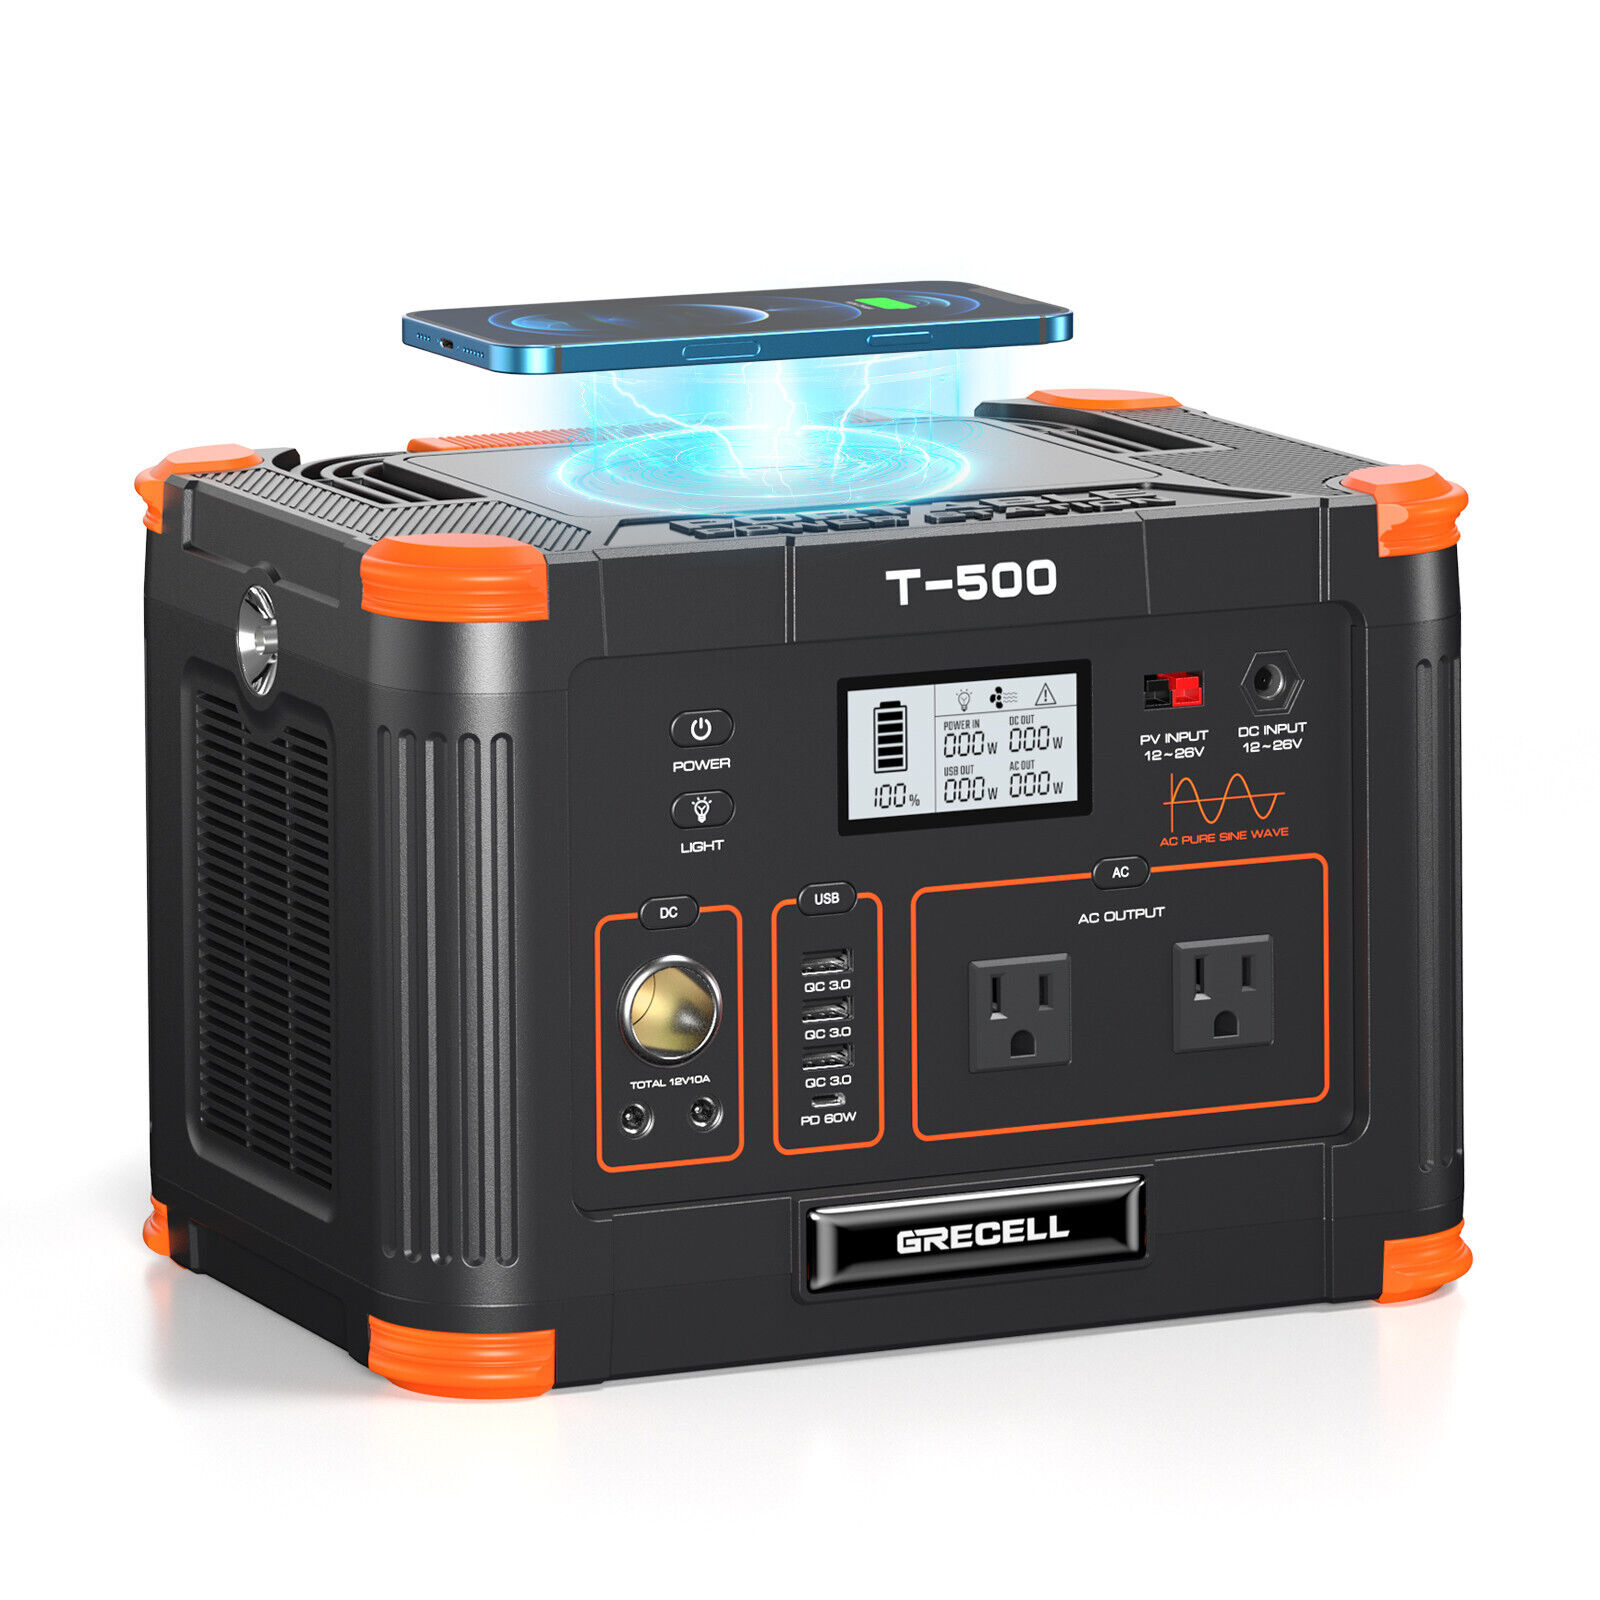 GRECELL 500W Portable Power Station Generator 519Wh Outdoor Solar Backup Battery